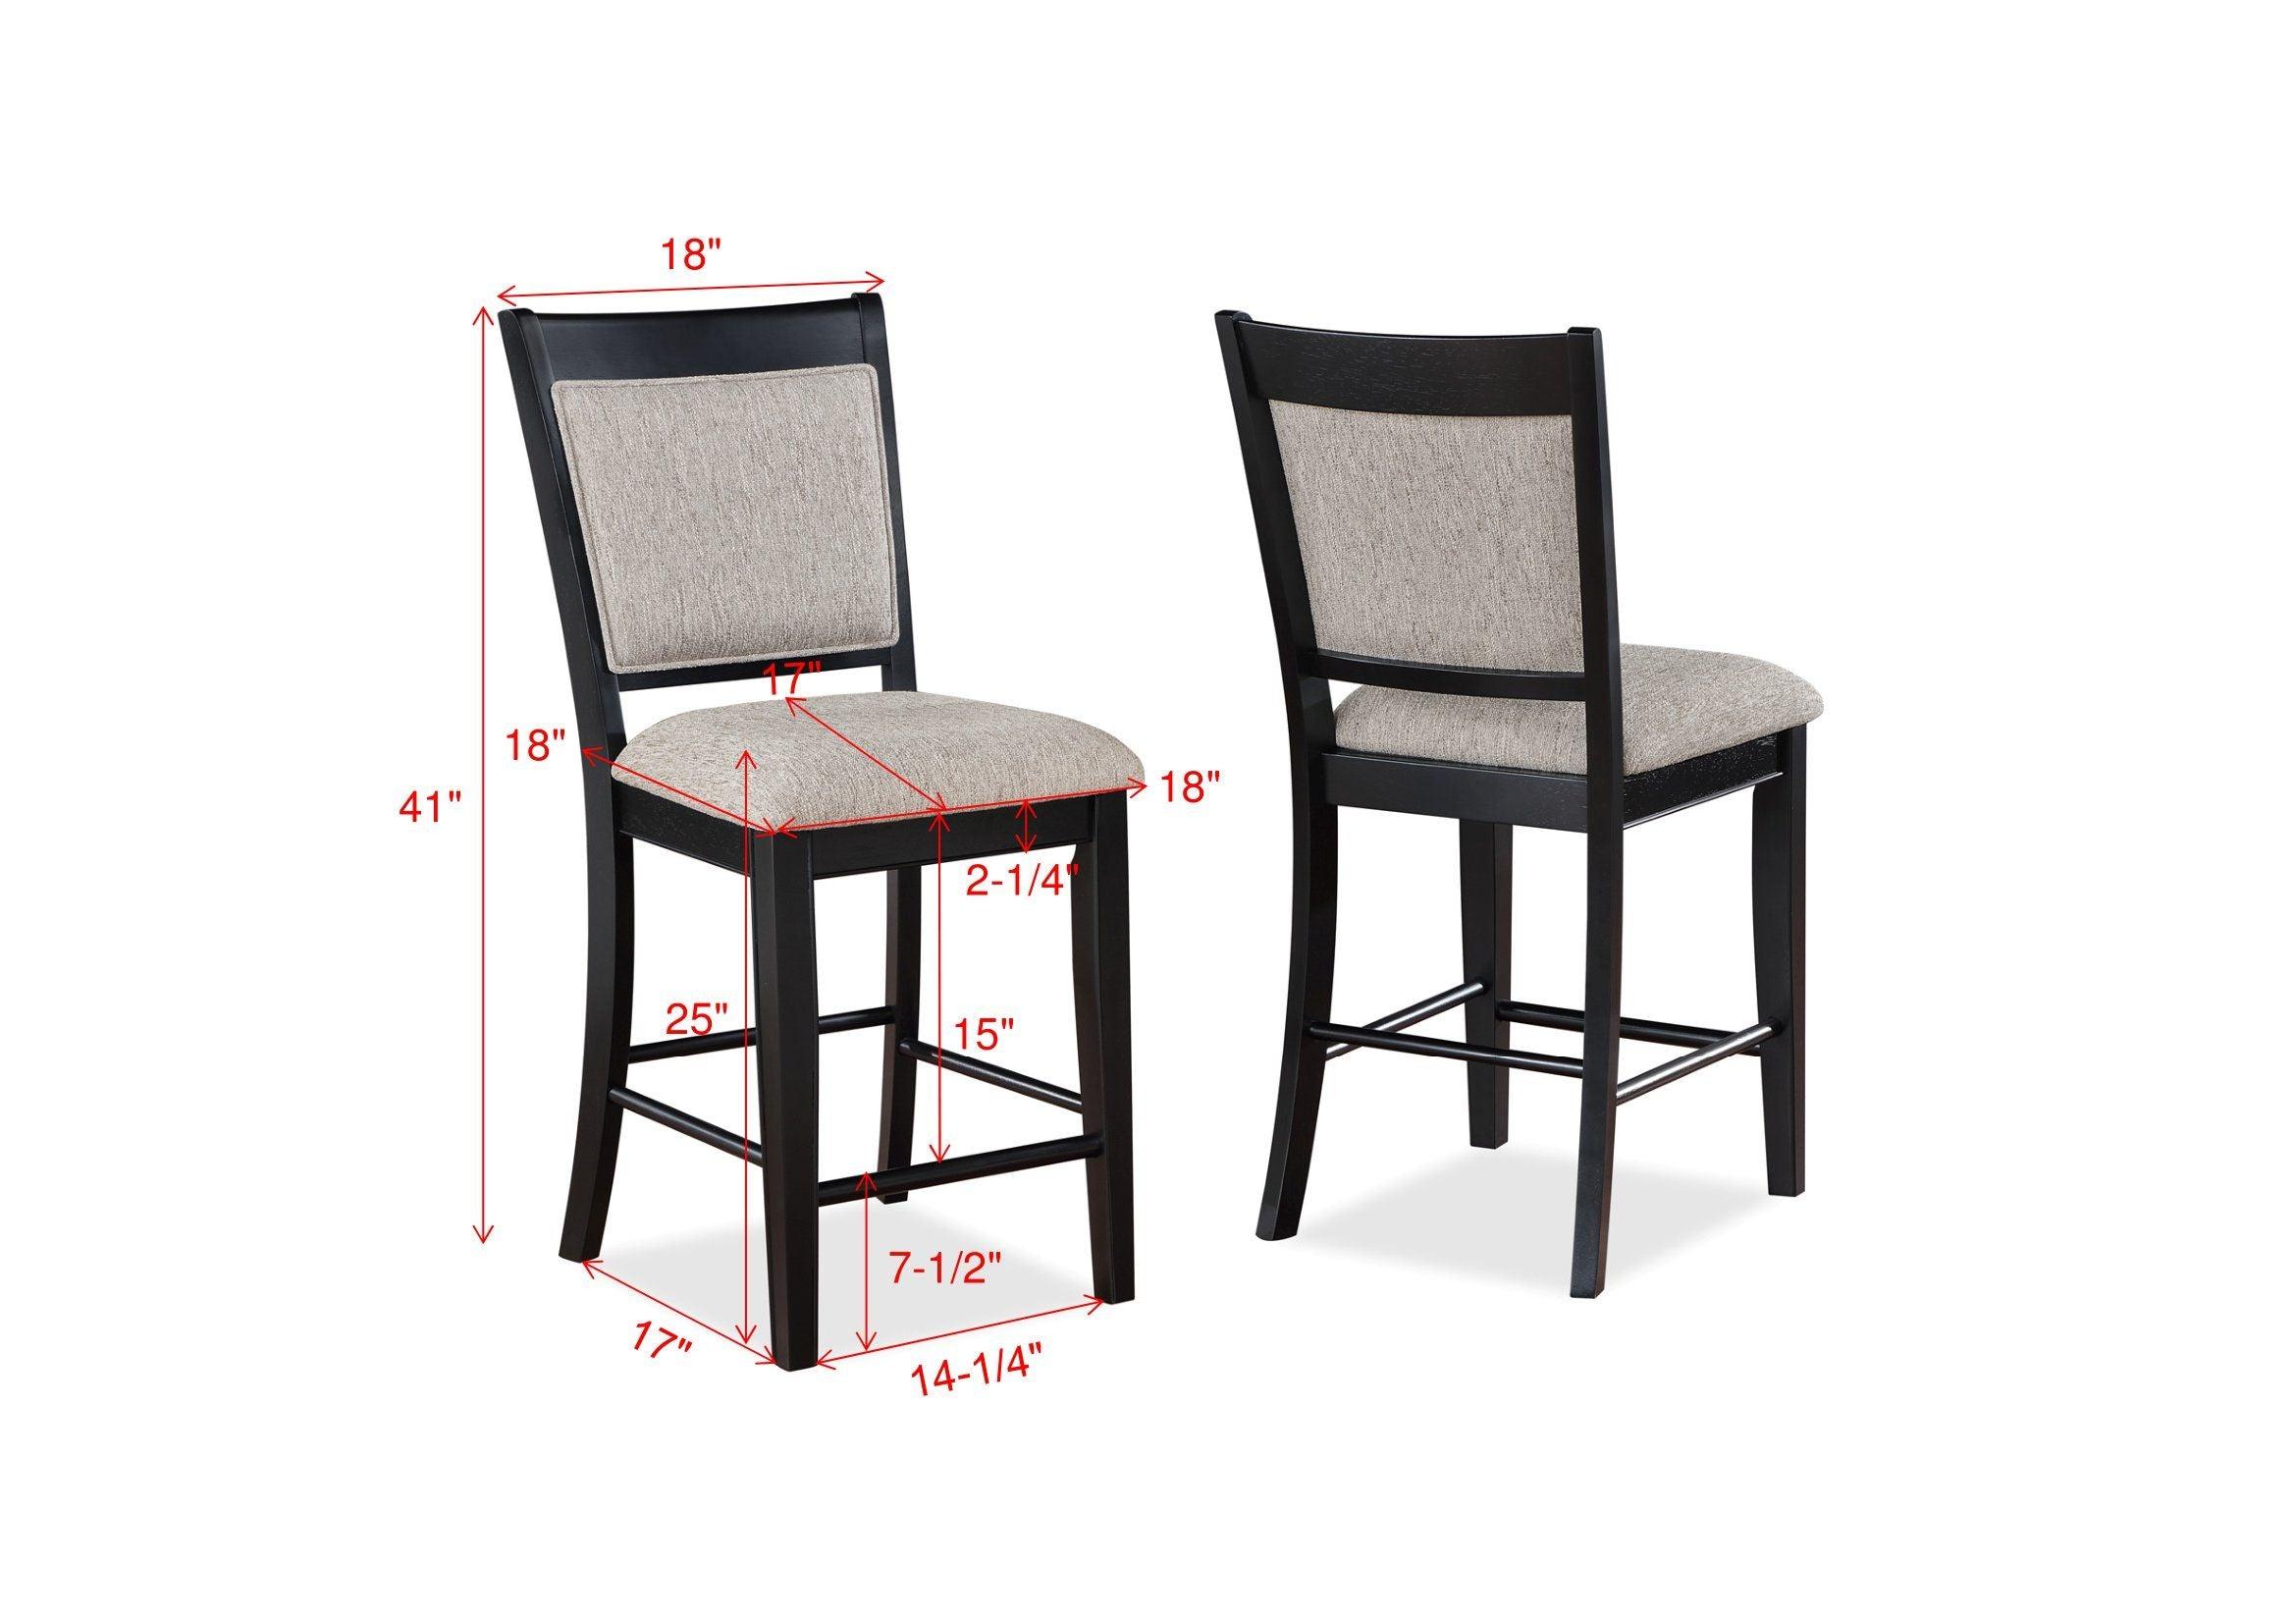 Crown Mark - Fulton - Counter Height Chair (Set of 2) - 5th Avenue Furniture